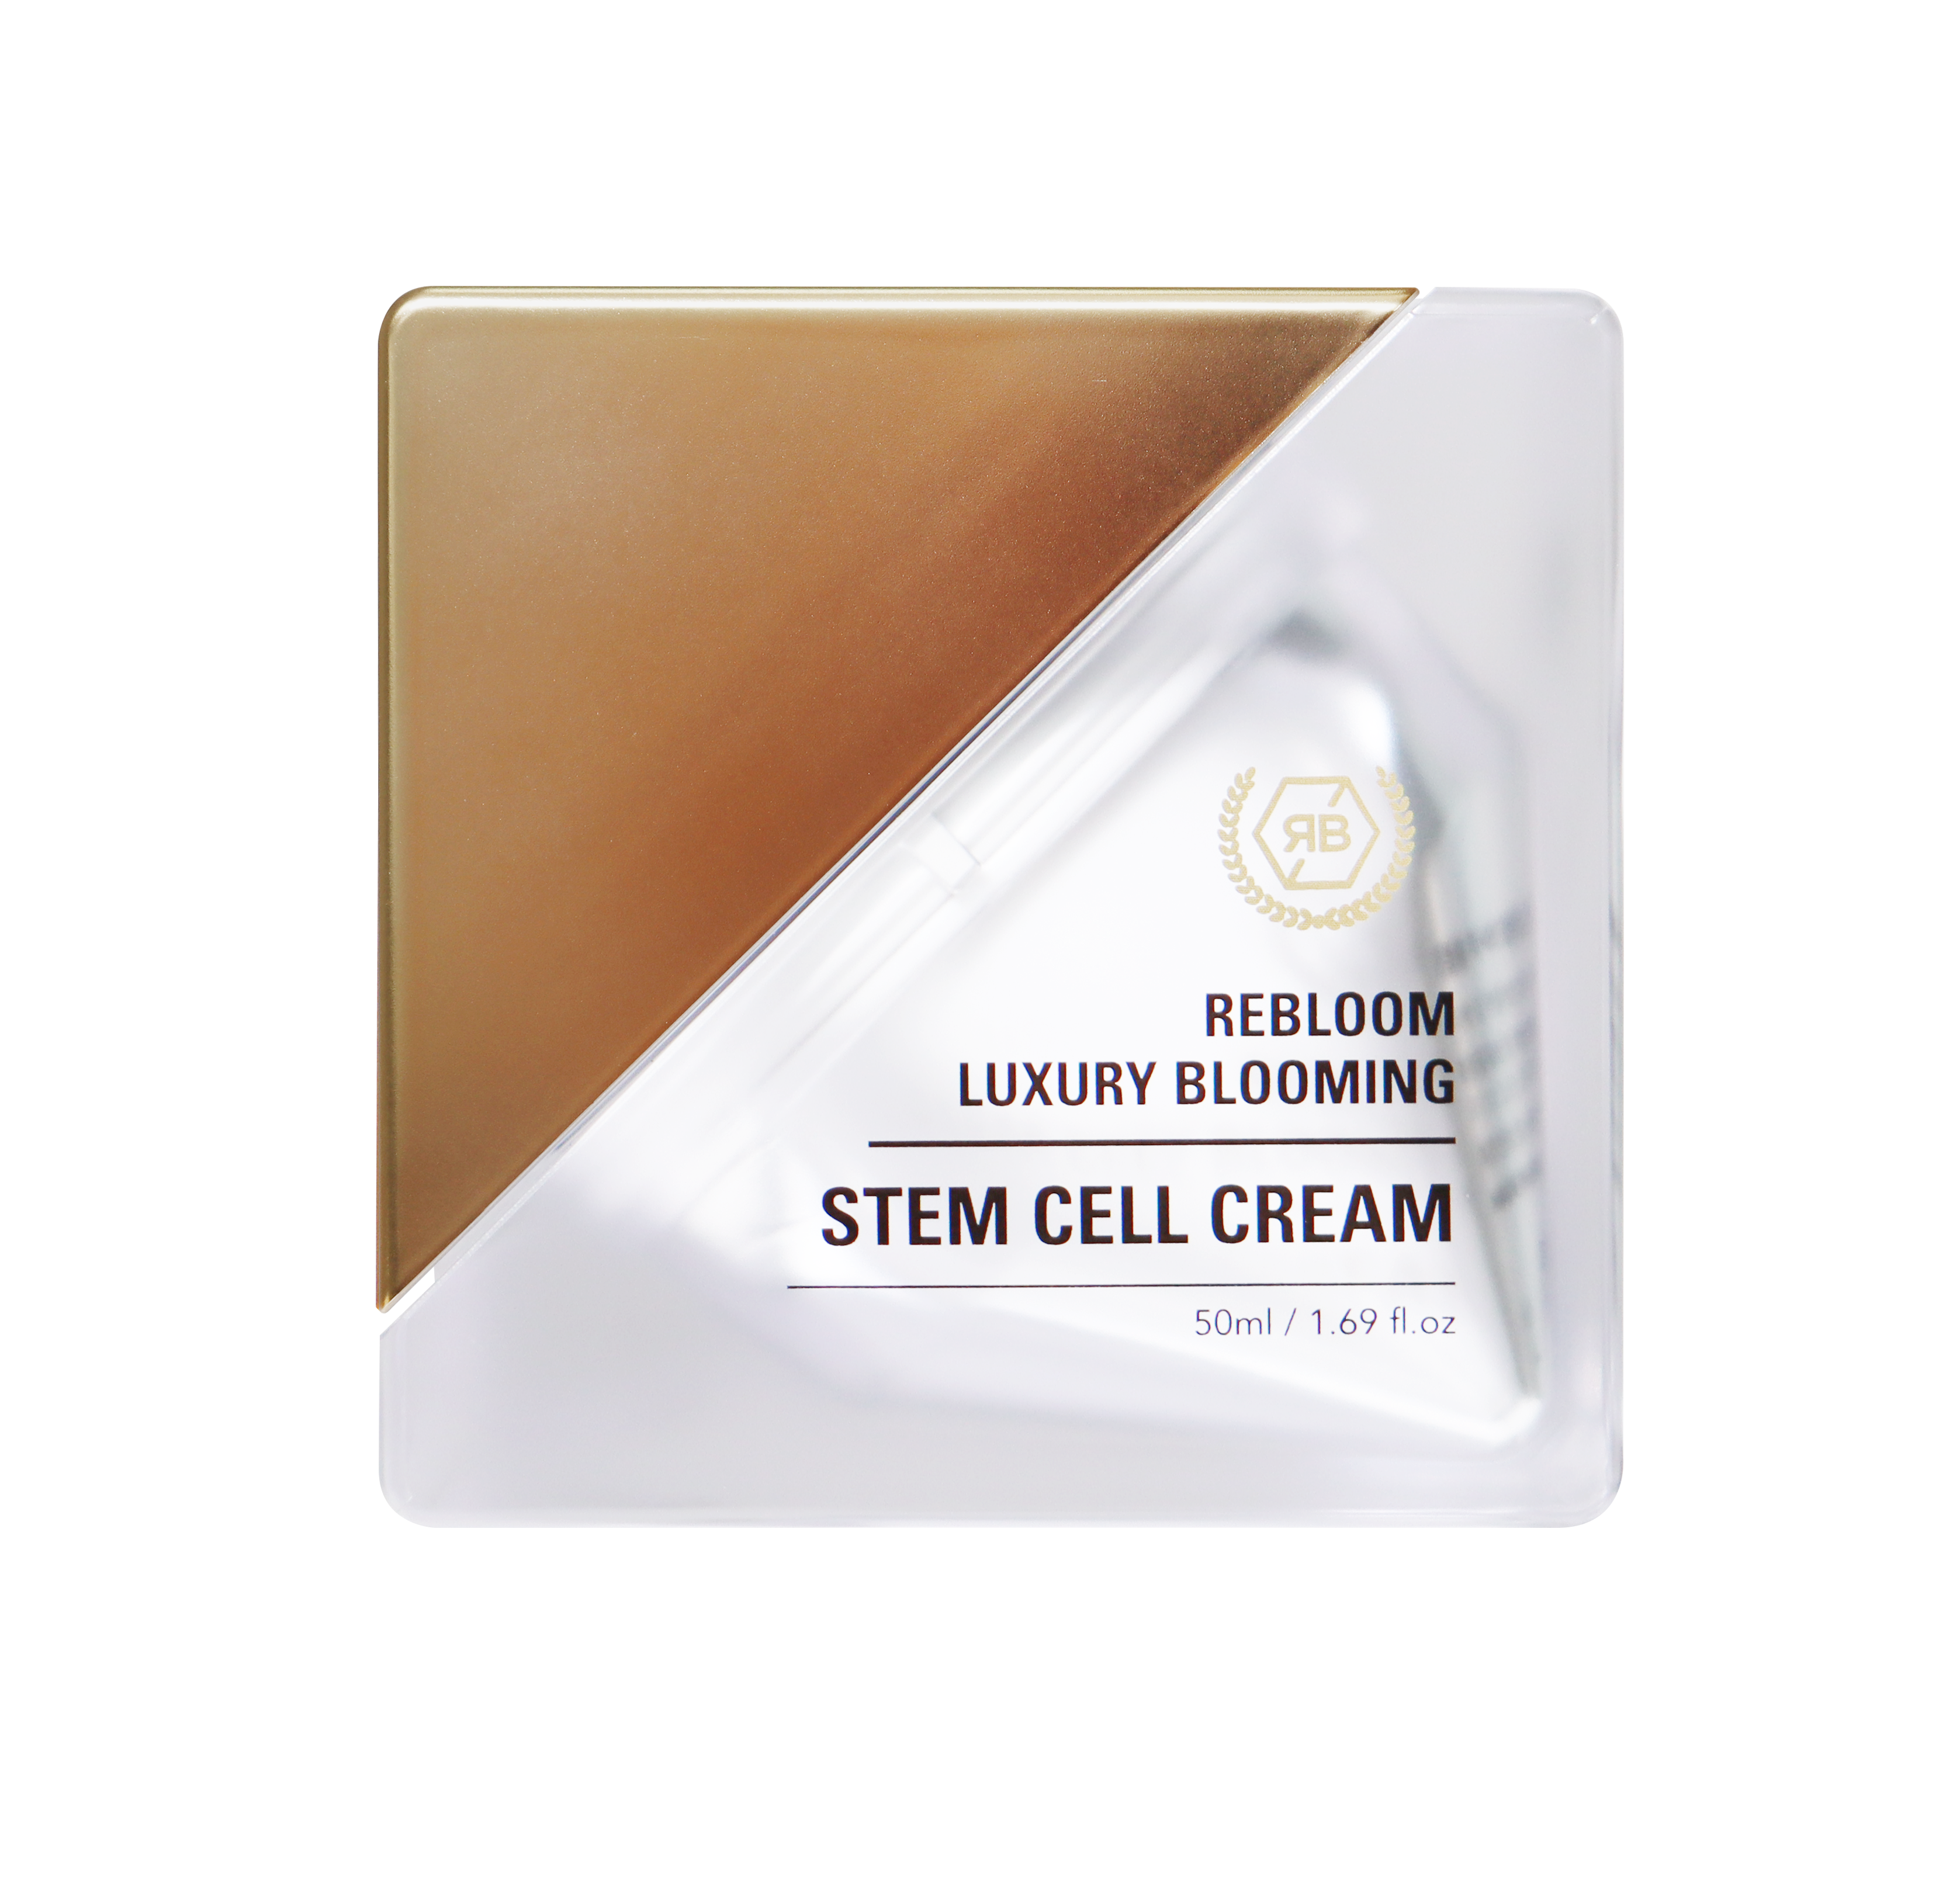 Re:bl Luxury Blooming Stem Cell Cream 50g